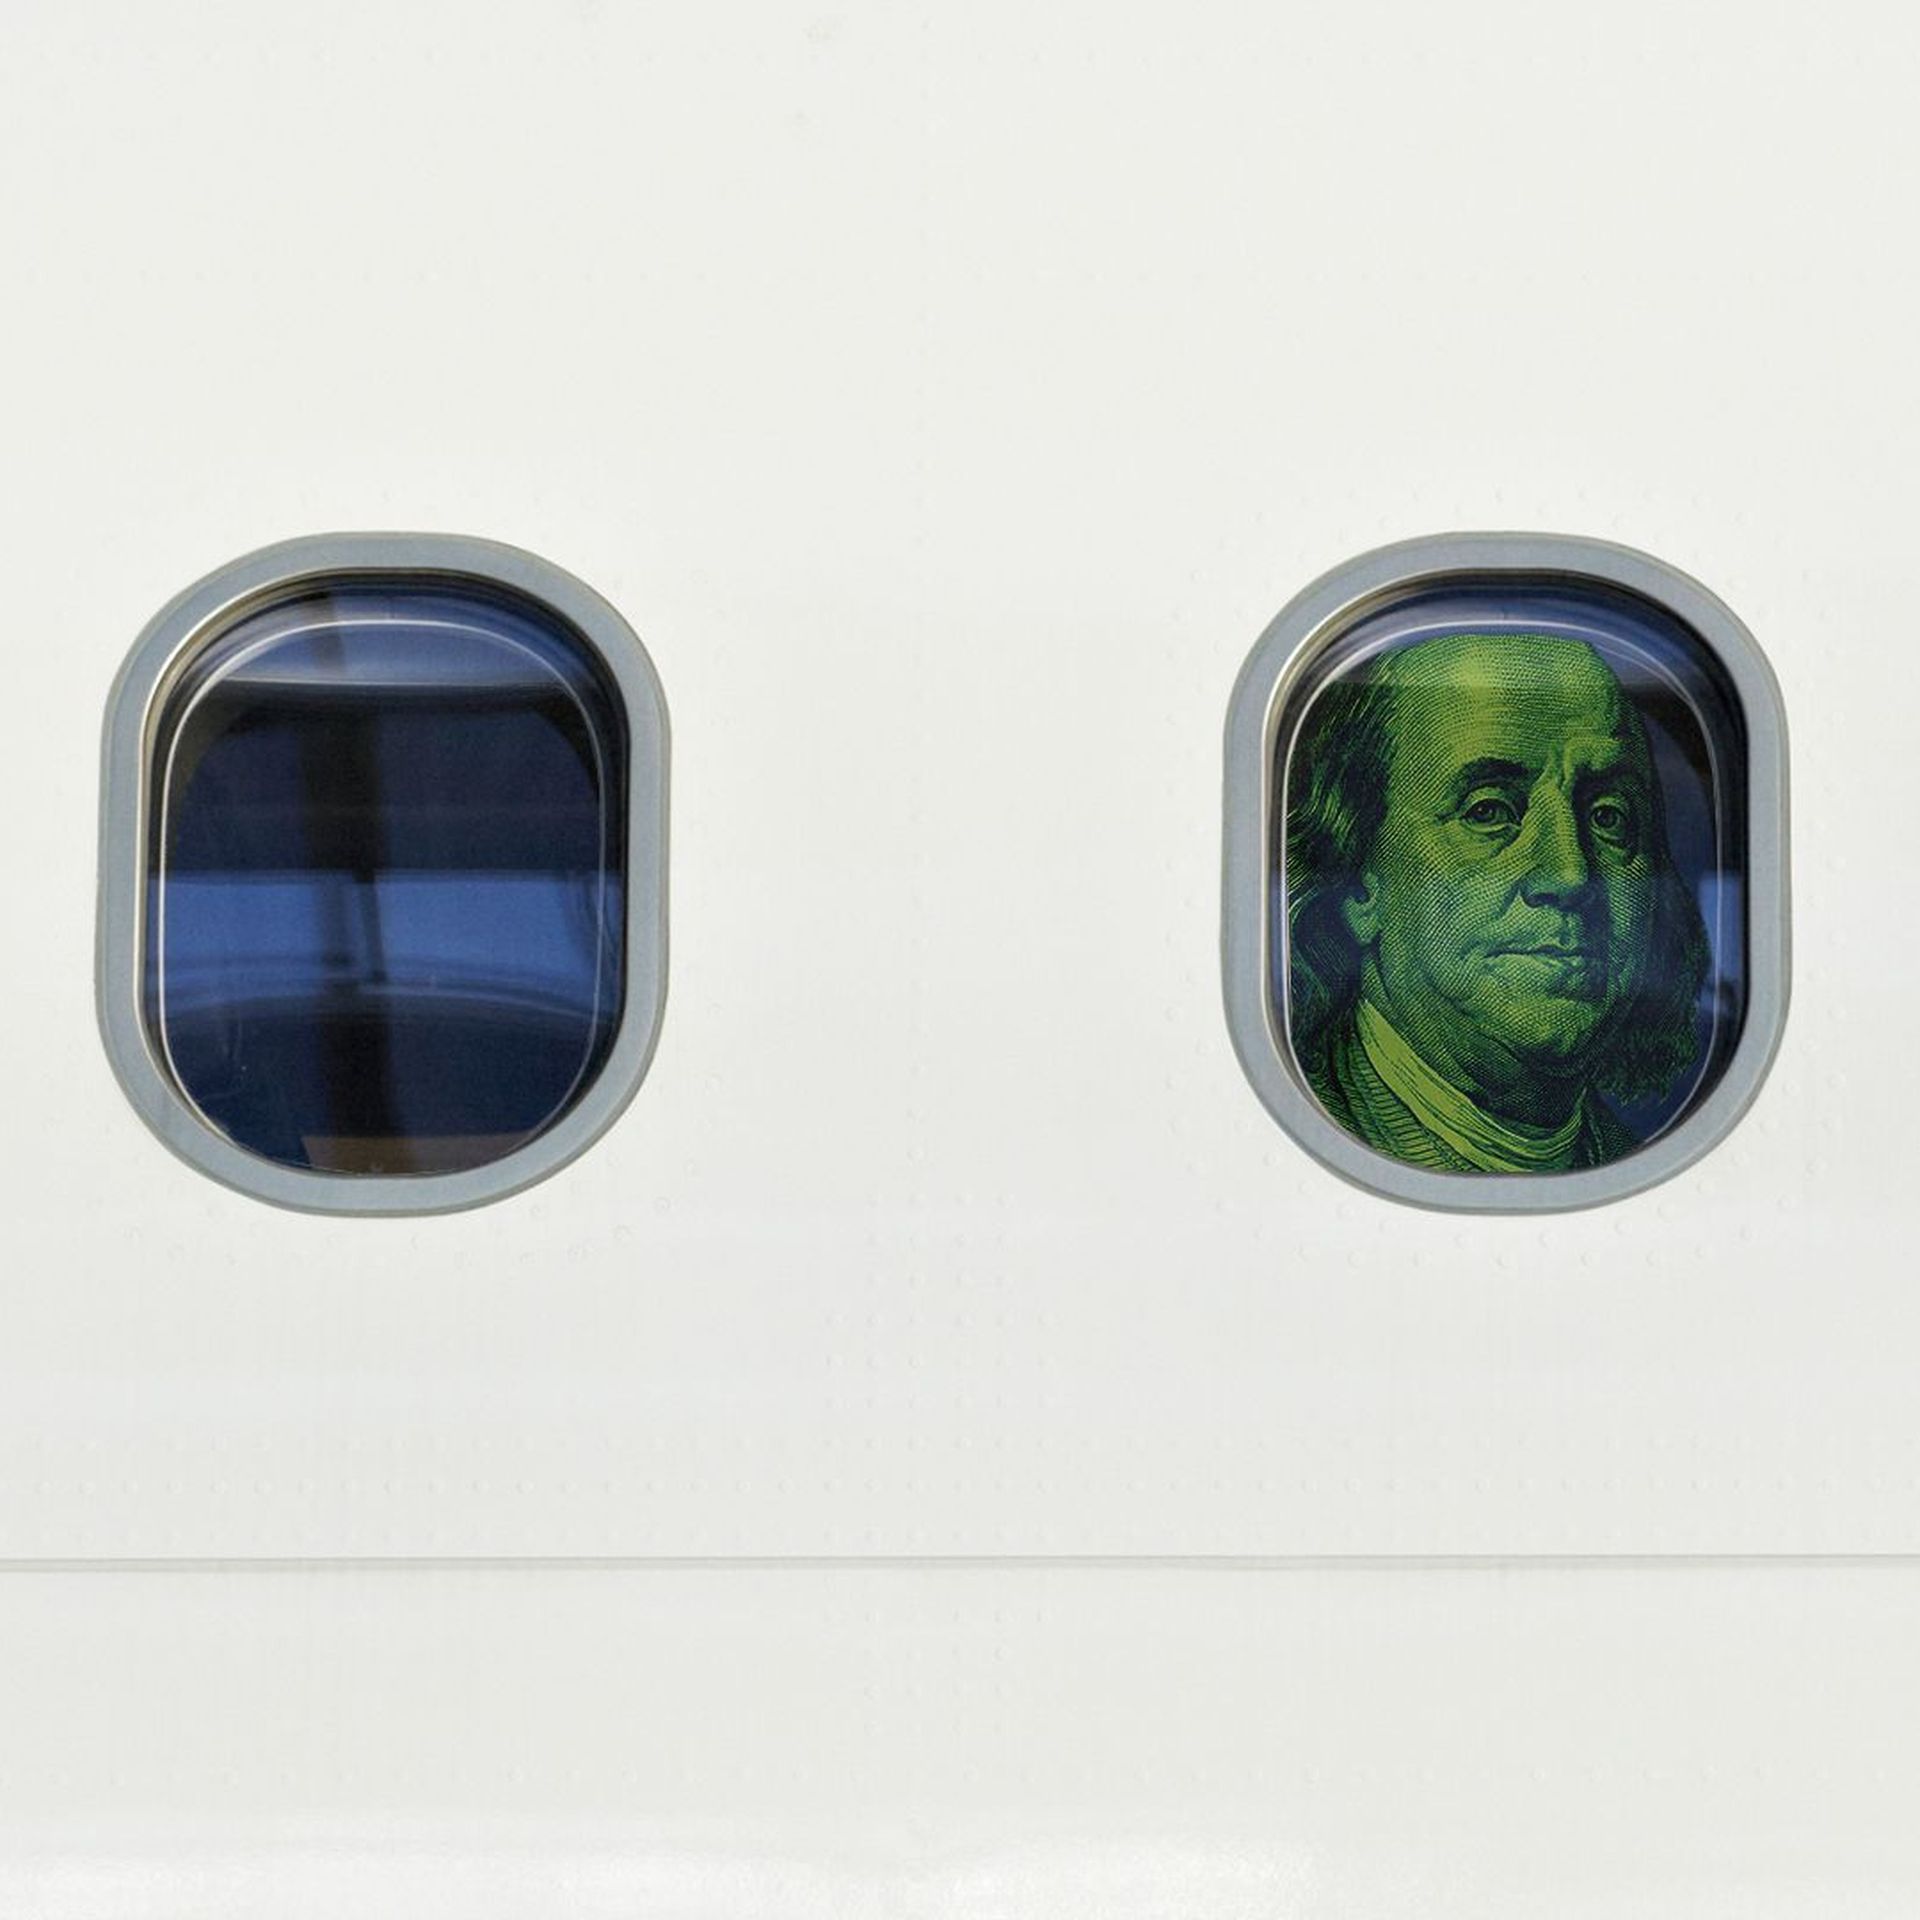 Illustration of Ben Franklin looking out of a plane window.